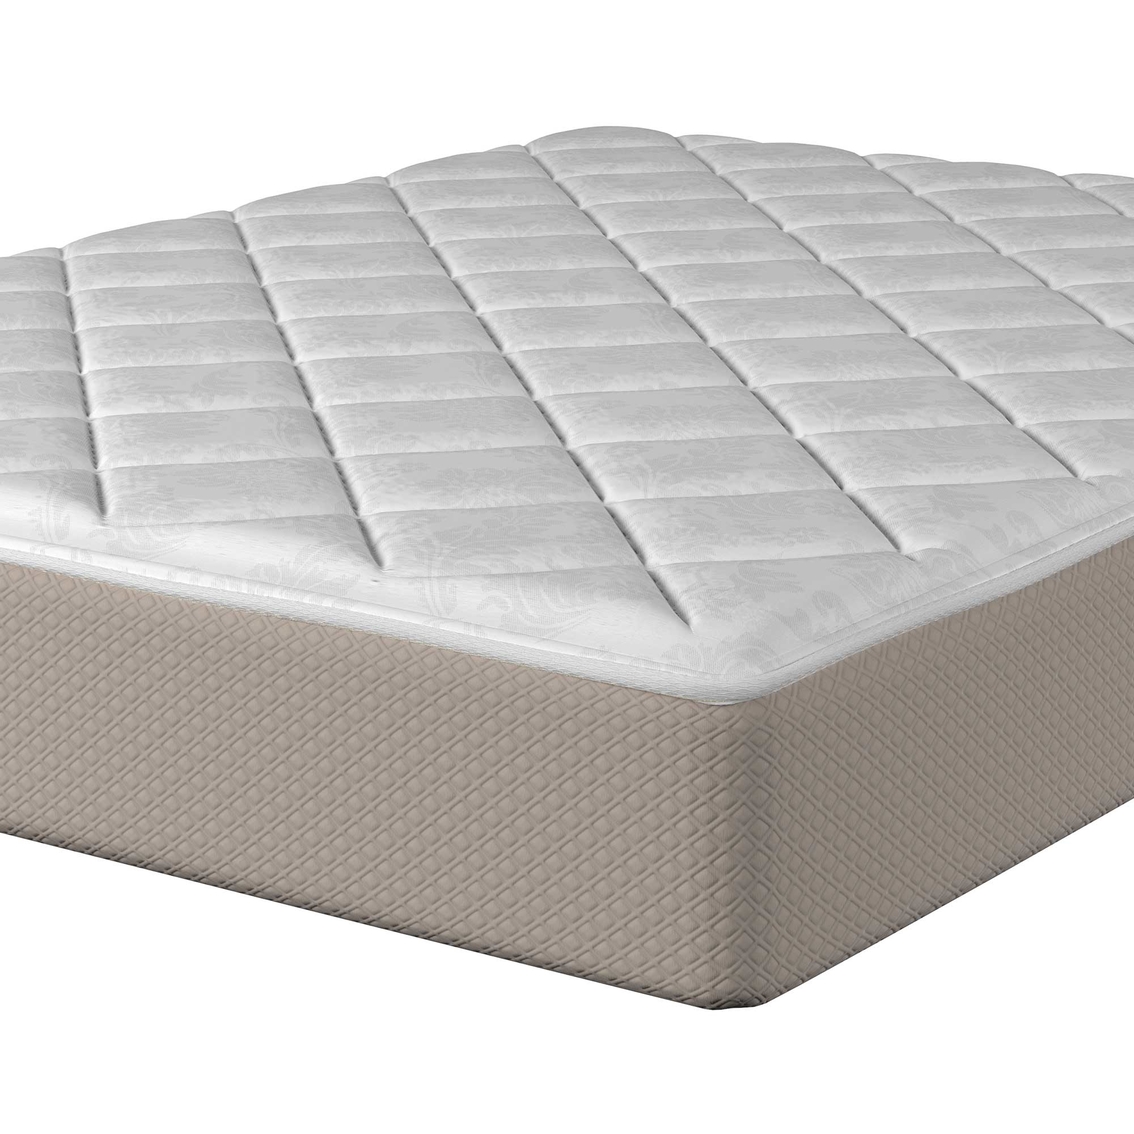 Eclipse Health-o_Pedic Quilted Foam 10 in. Mattress - Image 5 of 5